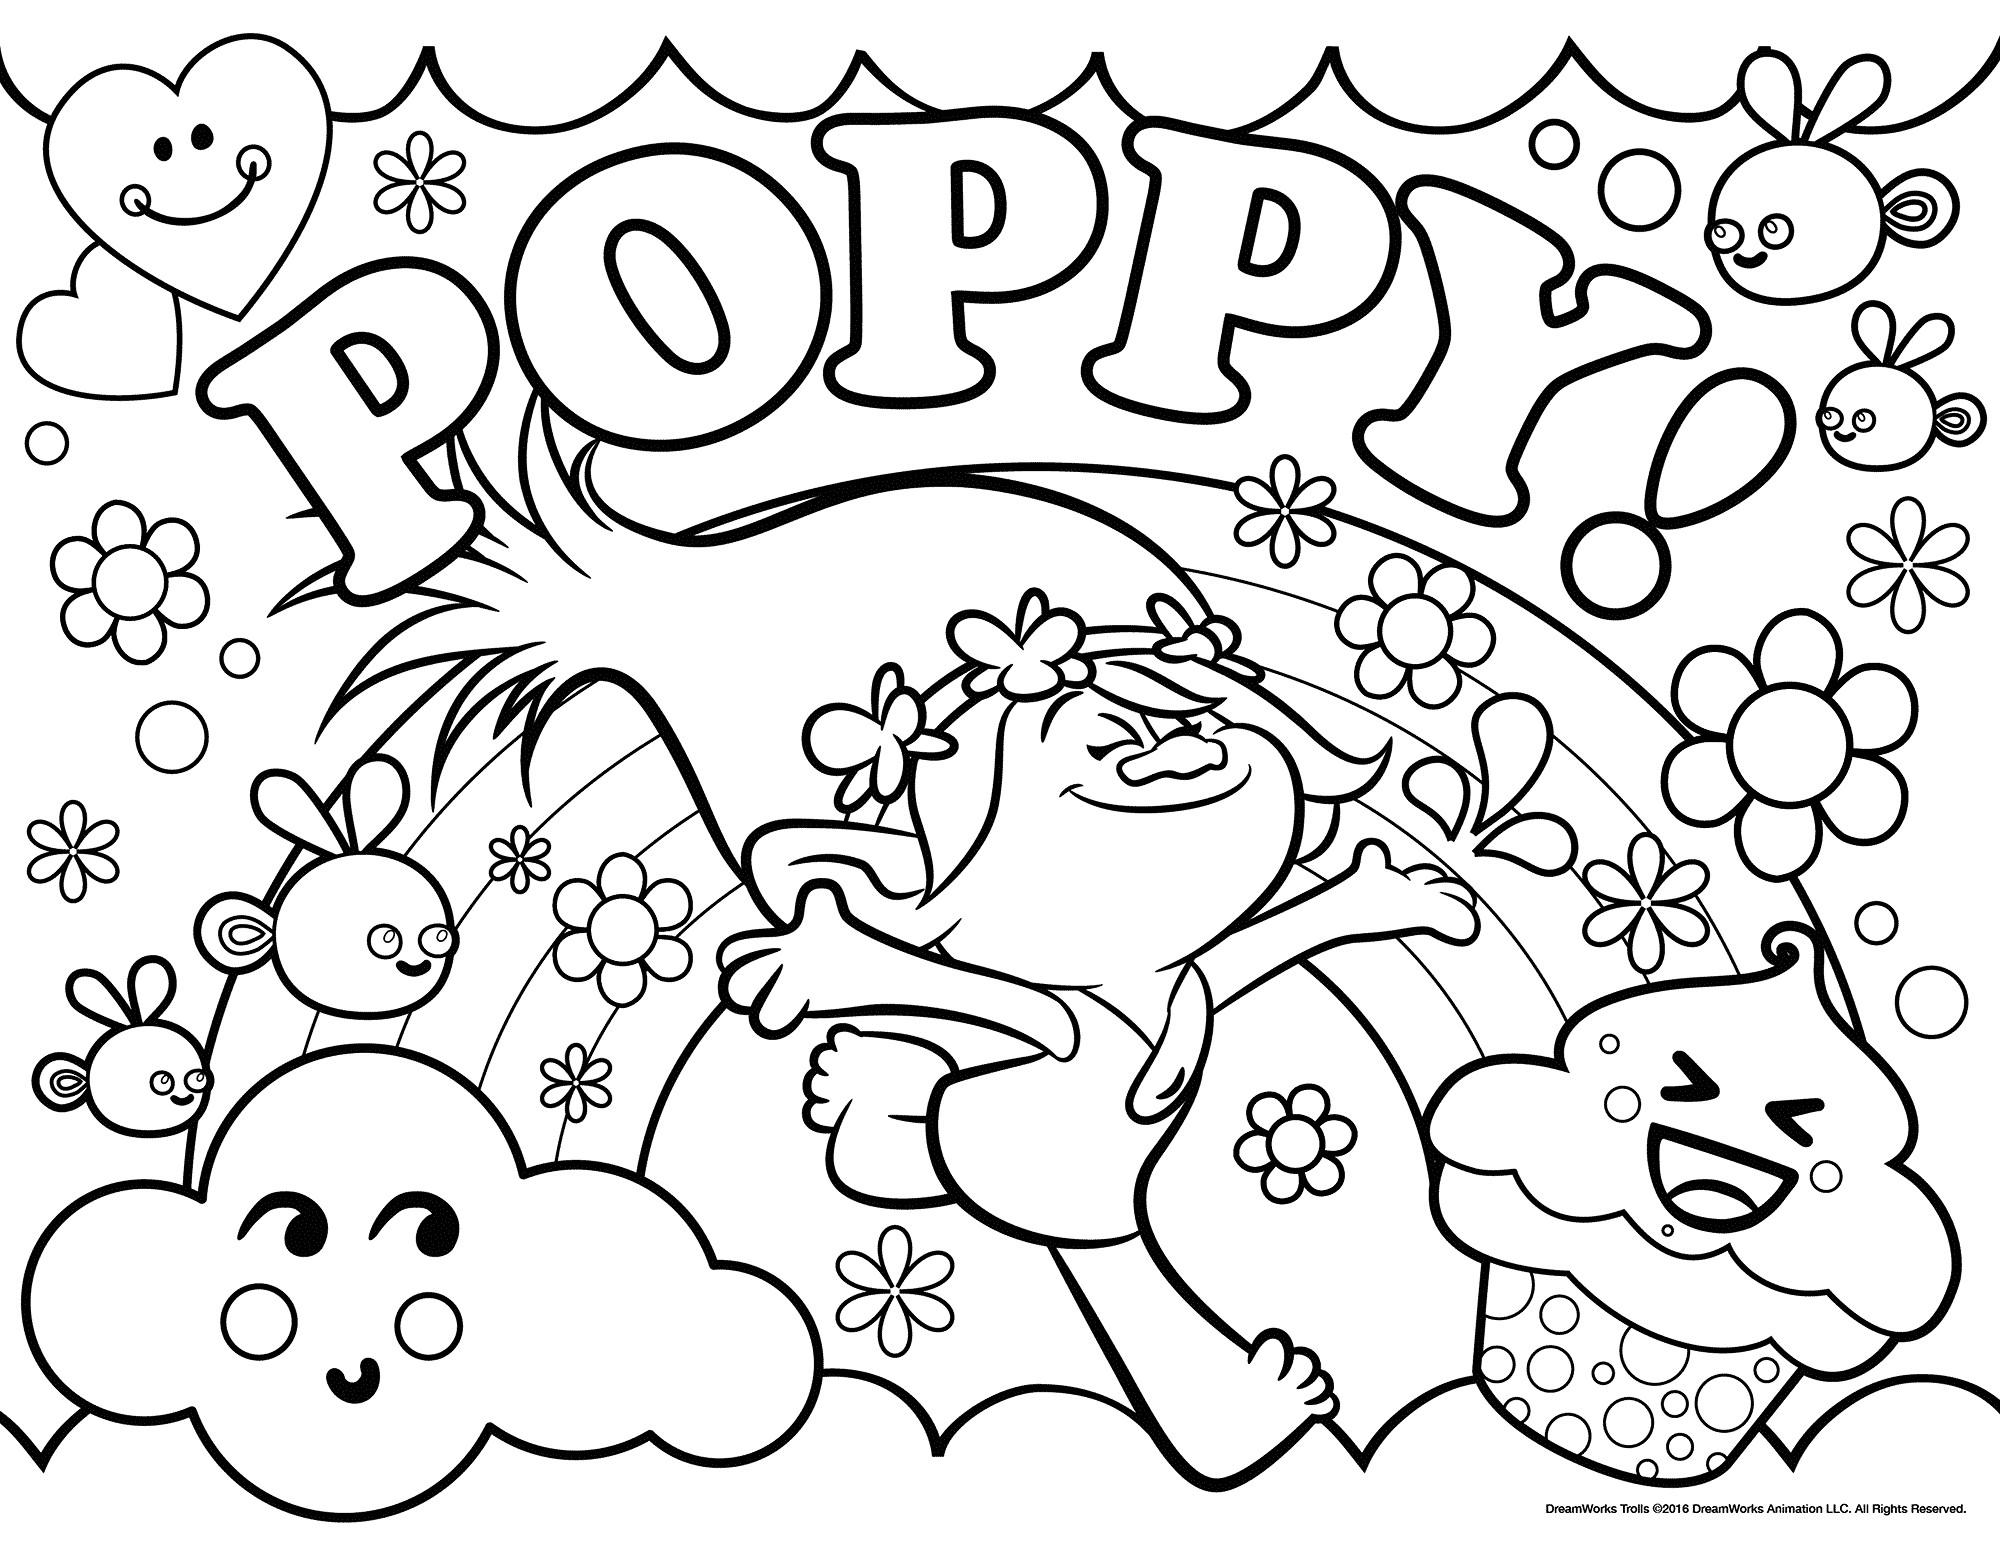 Poppy Trolls Coloring Pages
 Trolls Movie Coloring Pages Best Coloring Pages For Kids